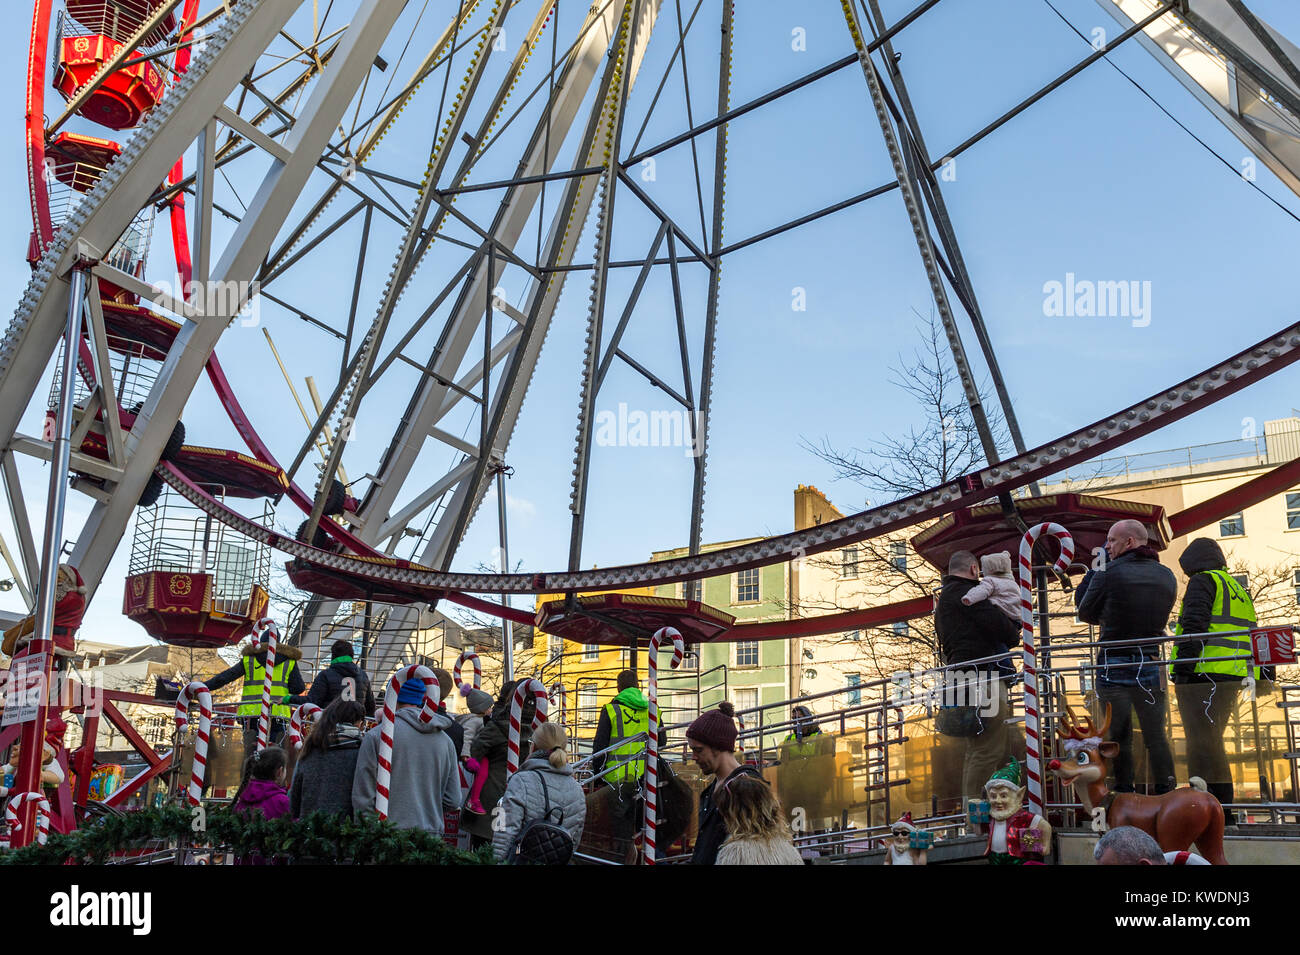 Queue for the ferris wheel on Grand Parade, Cork, Ireland at the Christmas Glow event. Stock Photo